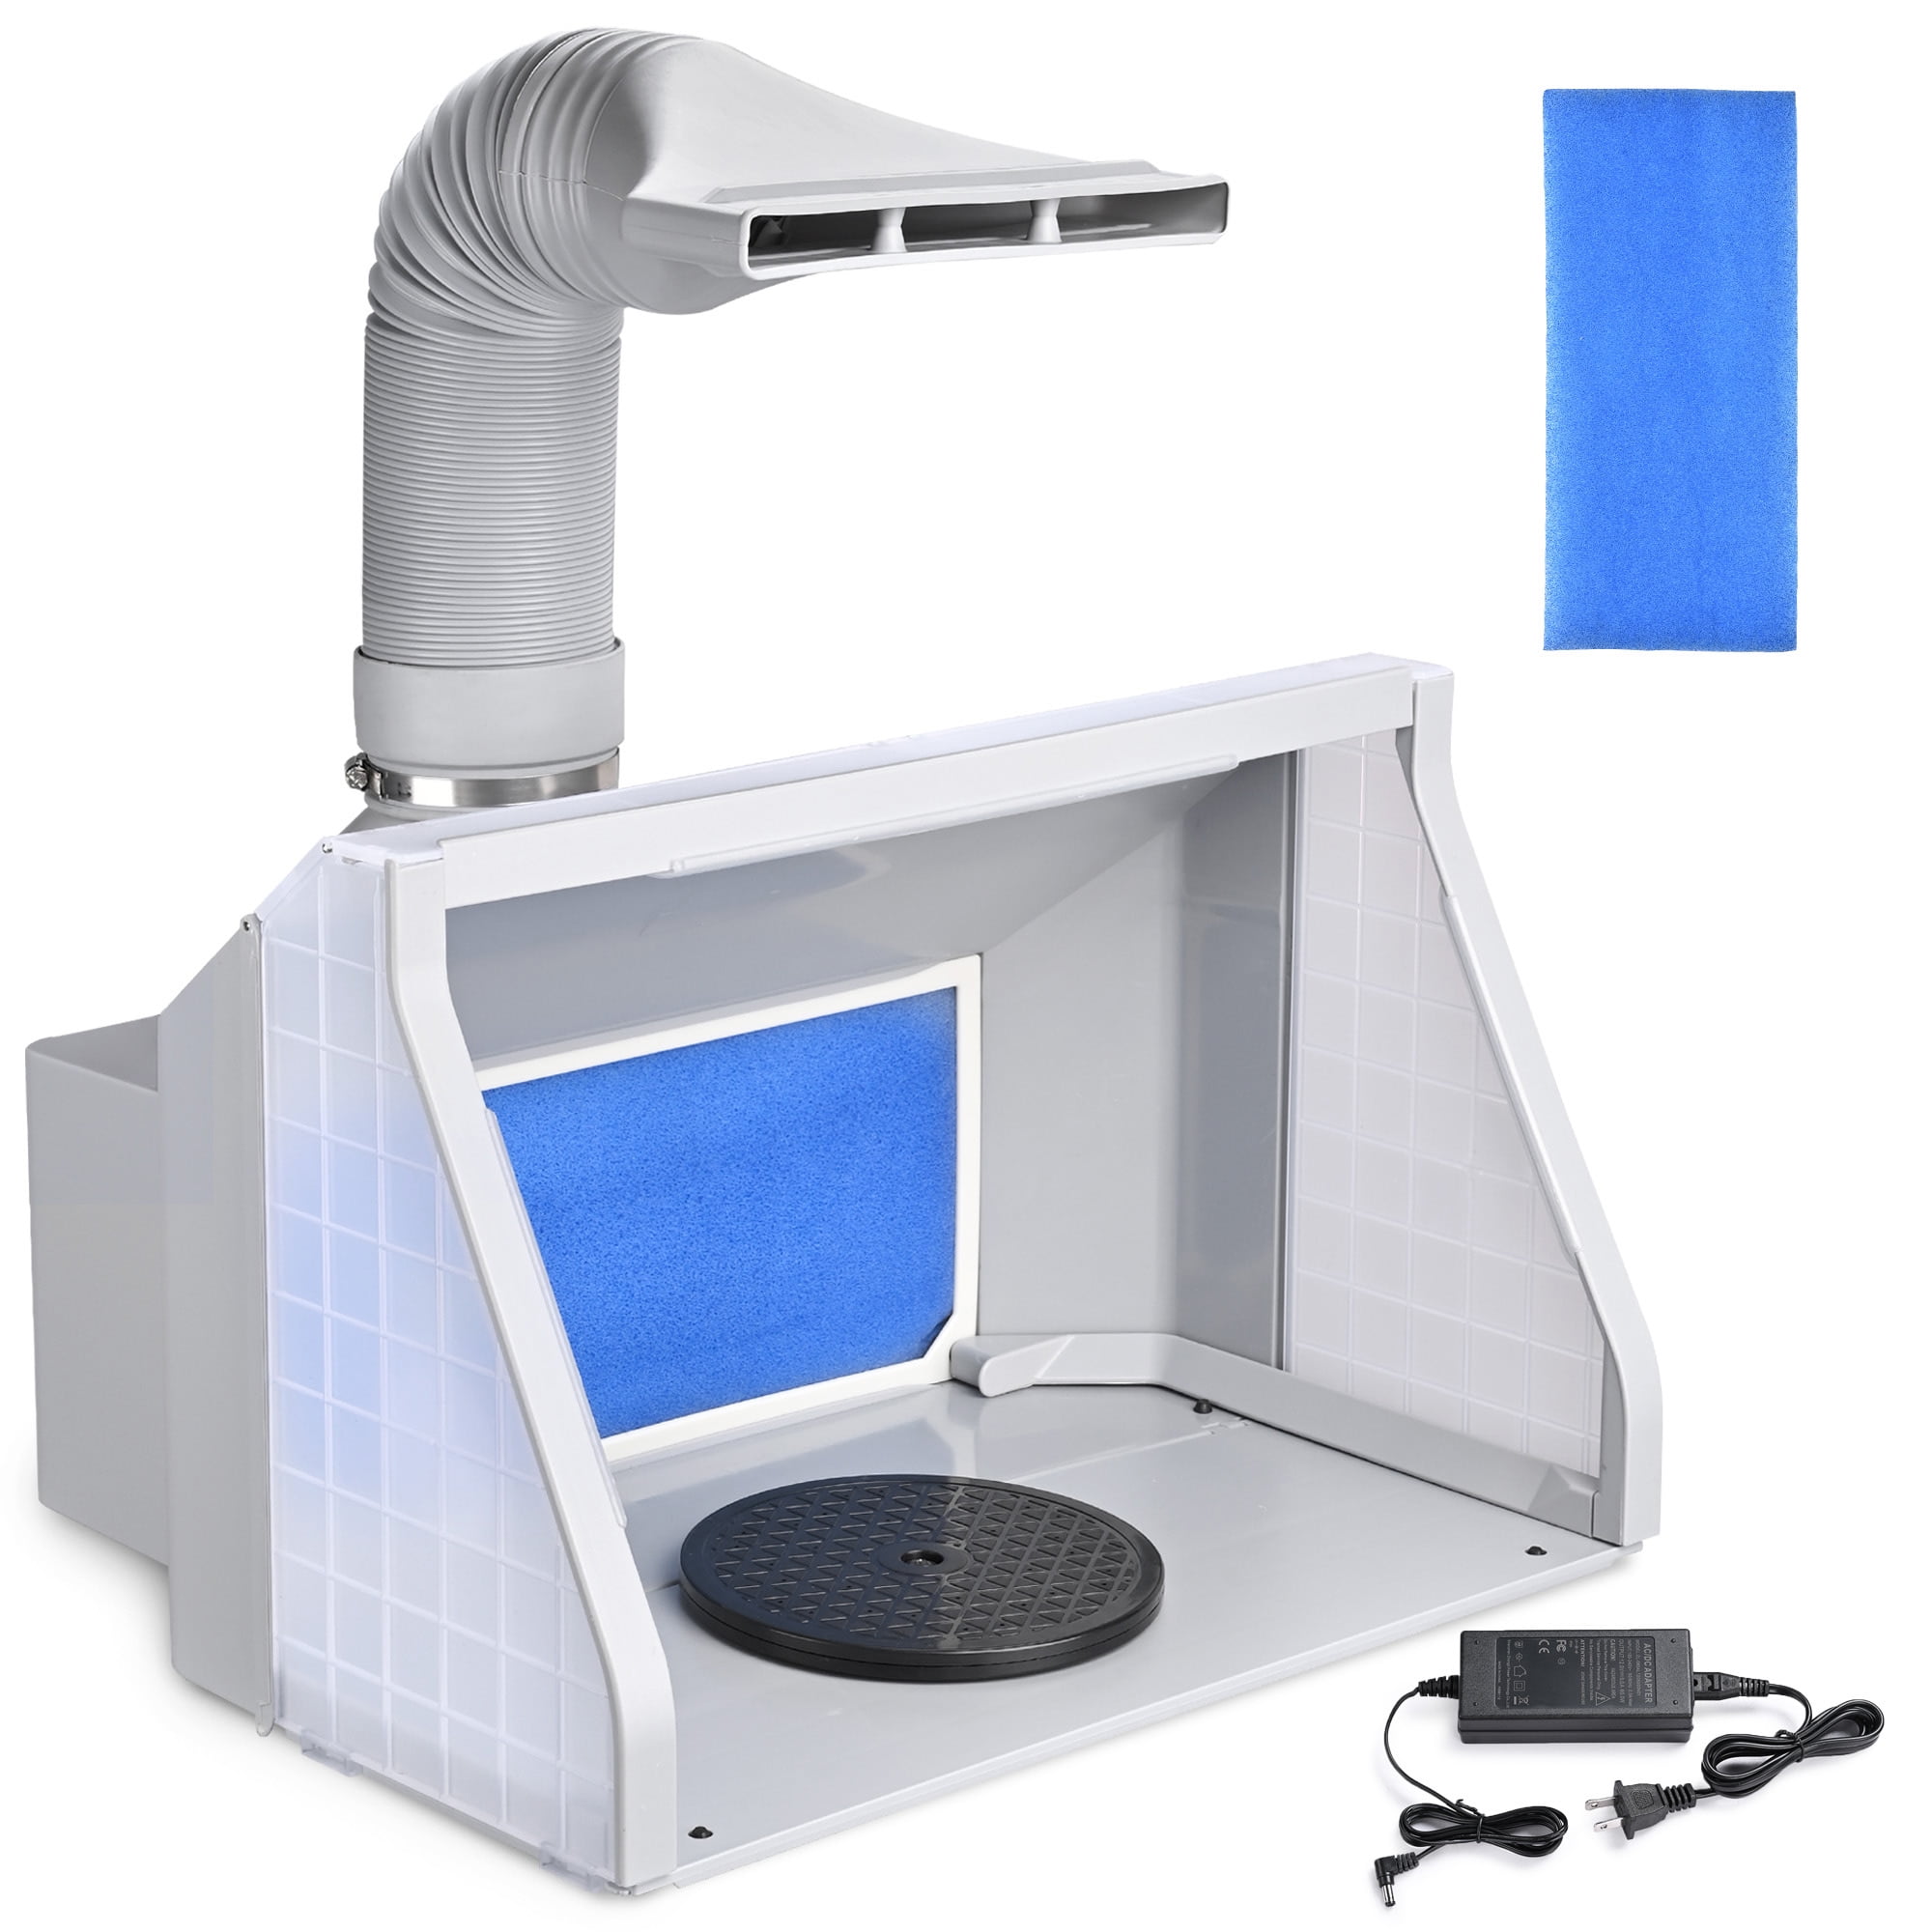 Spray Booth, Airbrush Lighted Hobby Spray Booth Kit with LED Light, 360°  Turntable, Dual Fans, Filter, Extension Hose, Airbrush Spray Booth for  Manual